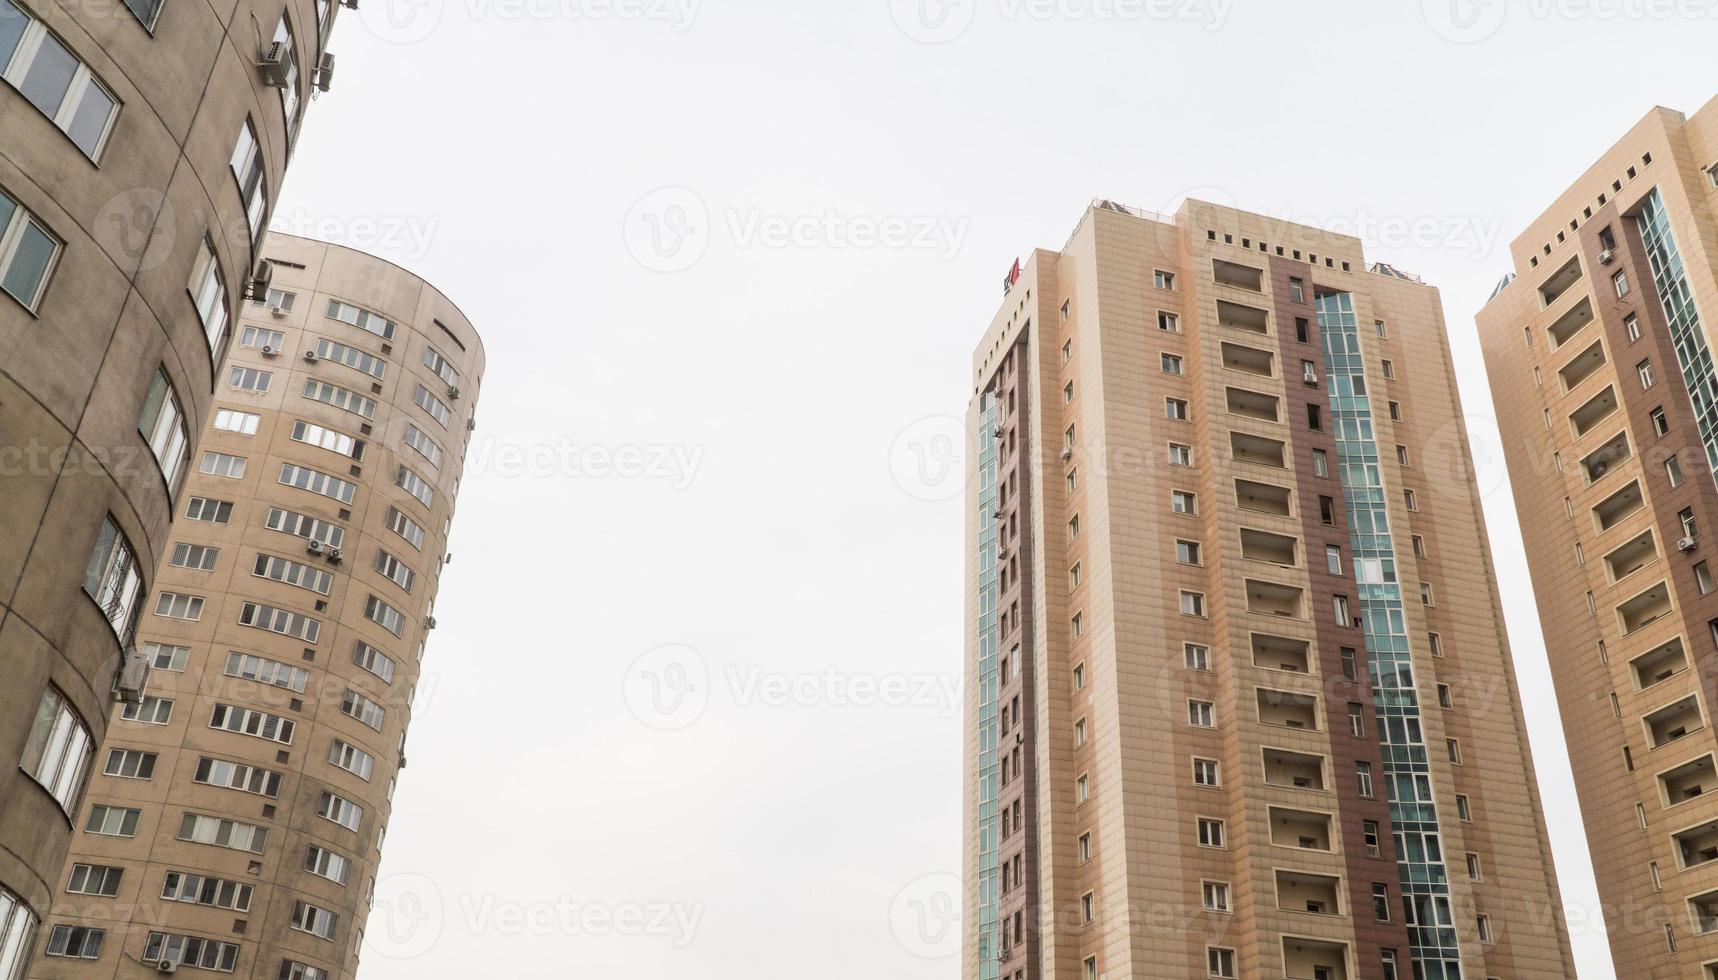 Multi storey residential complex against the sky. Urban architecture photo